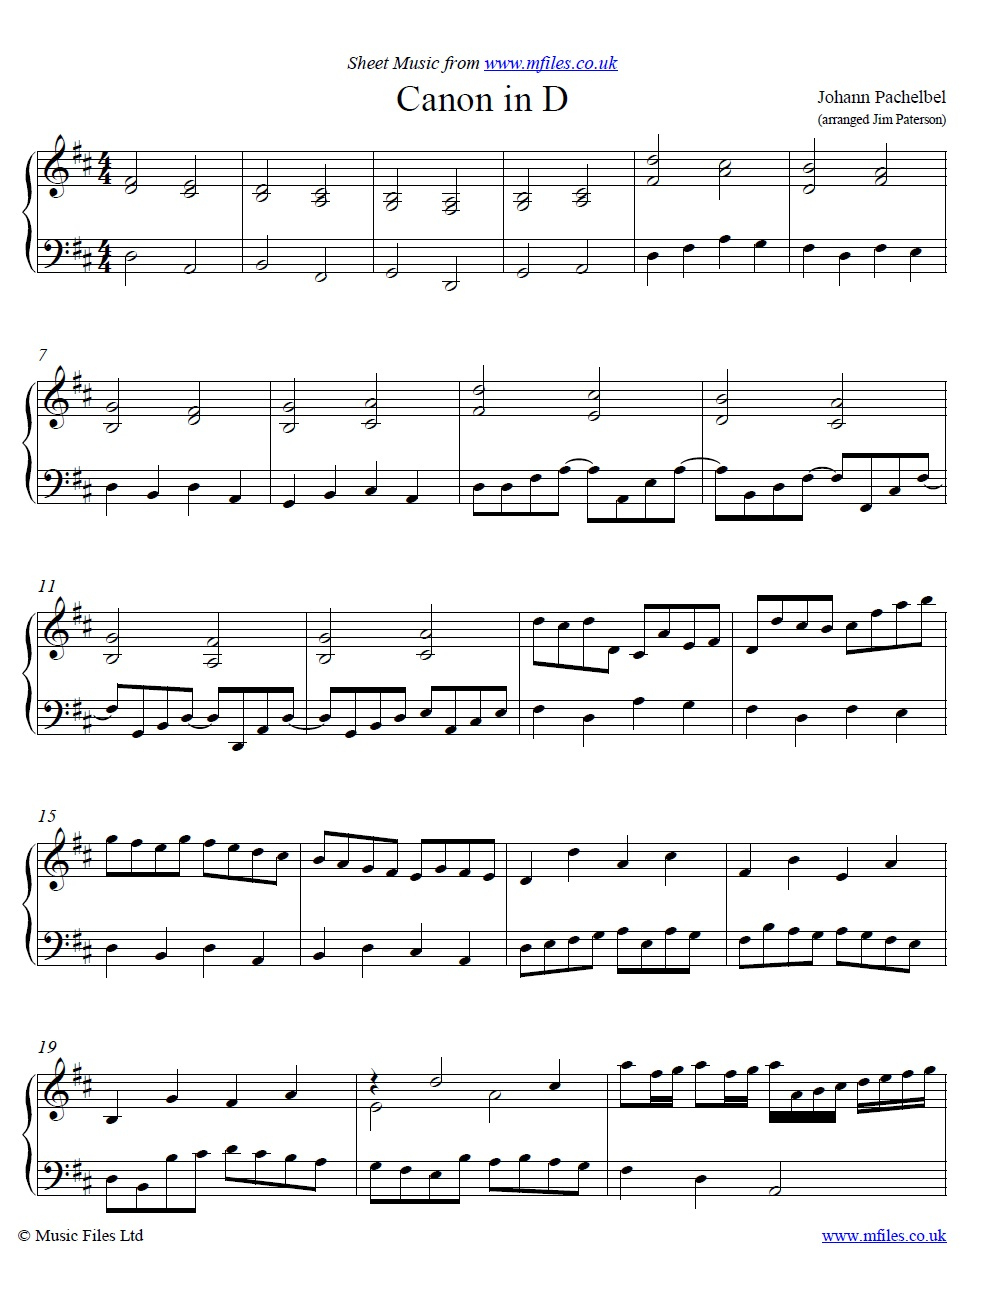 Johann Pachelbel : Canon In D - Arranged For Piano : Classical within Canon In D Piano Sheet Music Free Printable